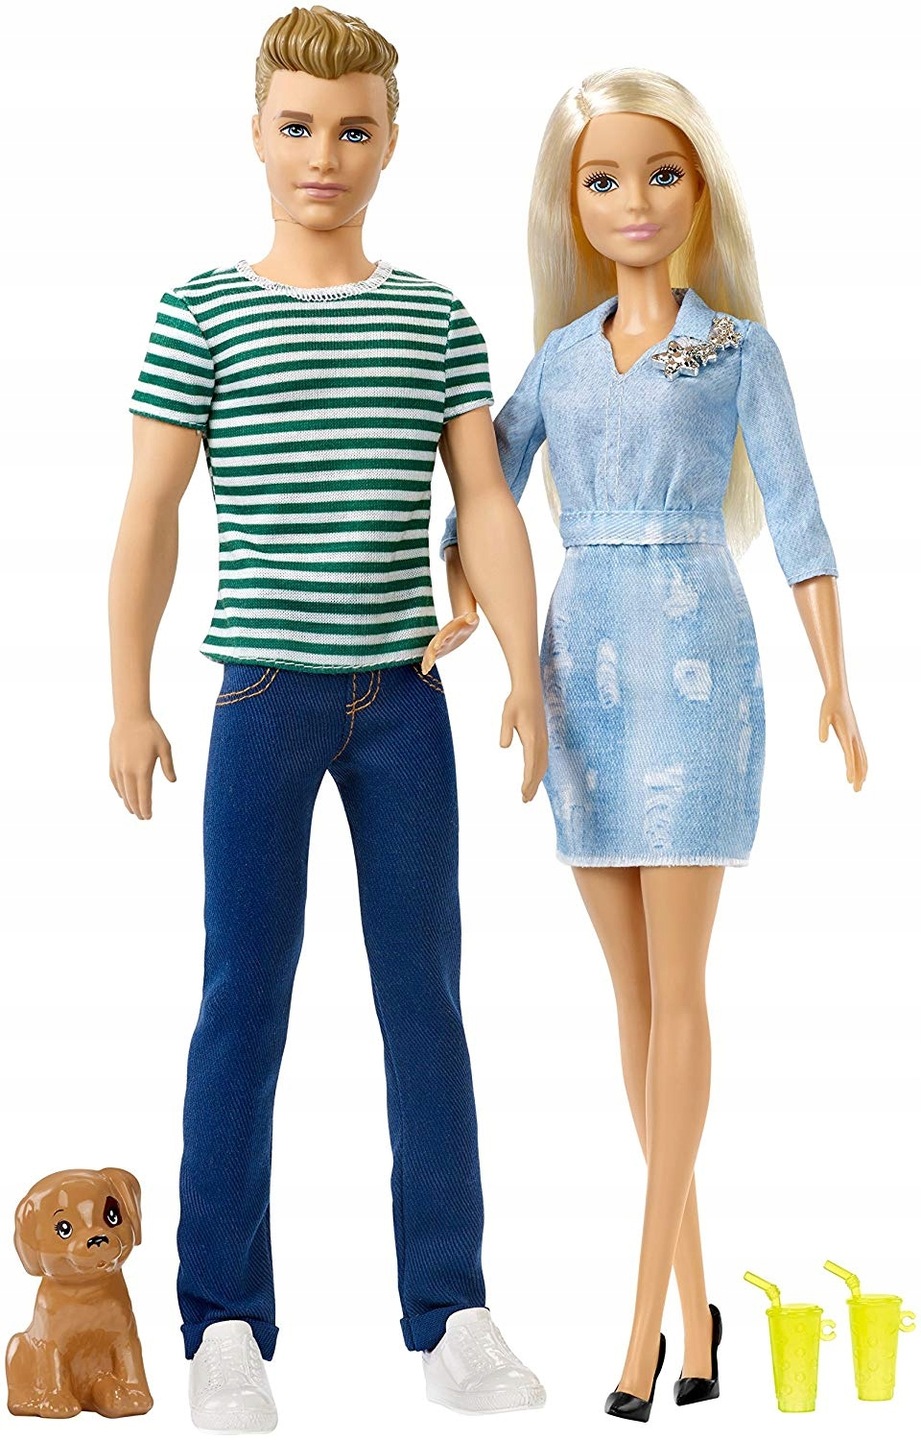 BARBIE AND KEN DOLL ON A DATE DLH76 Child's age 3 years +